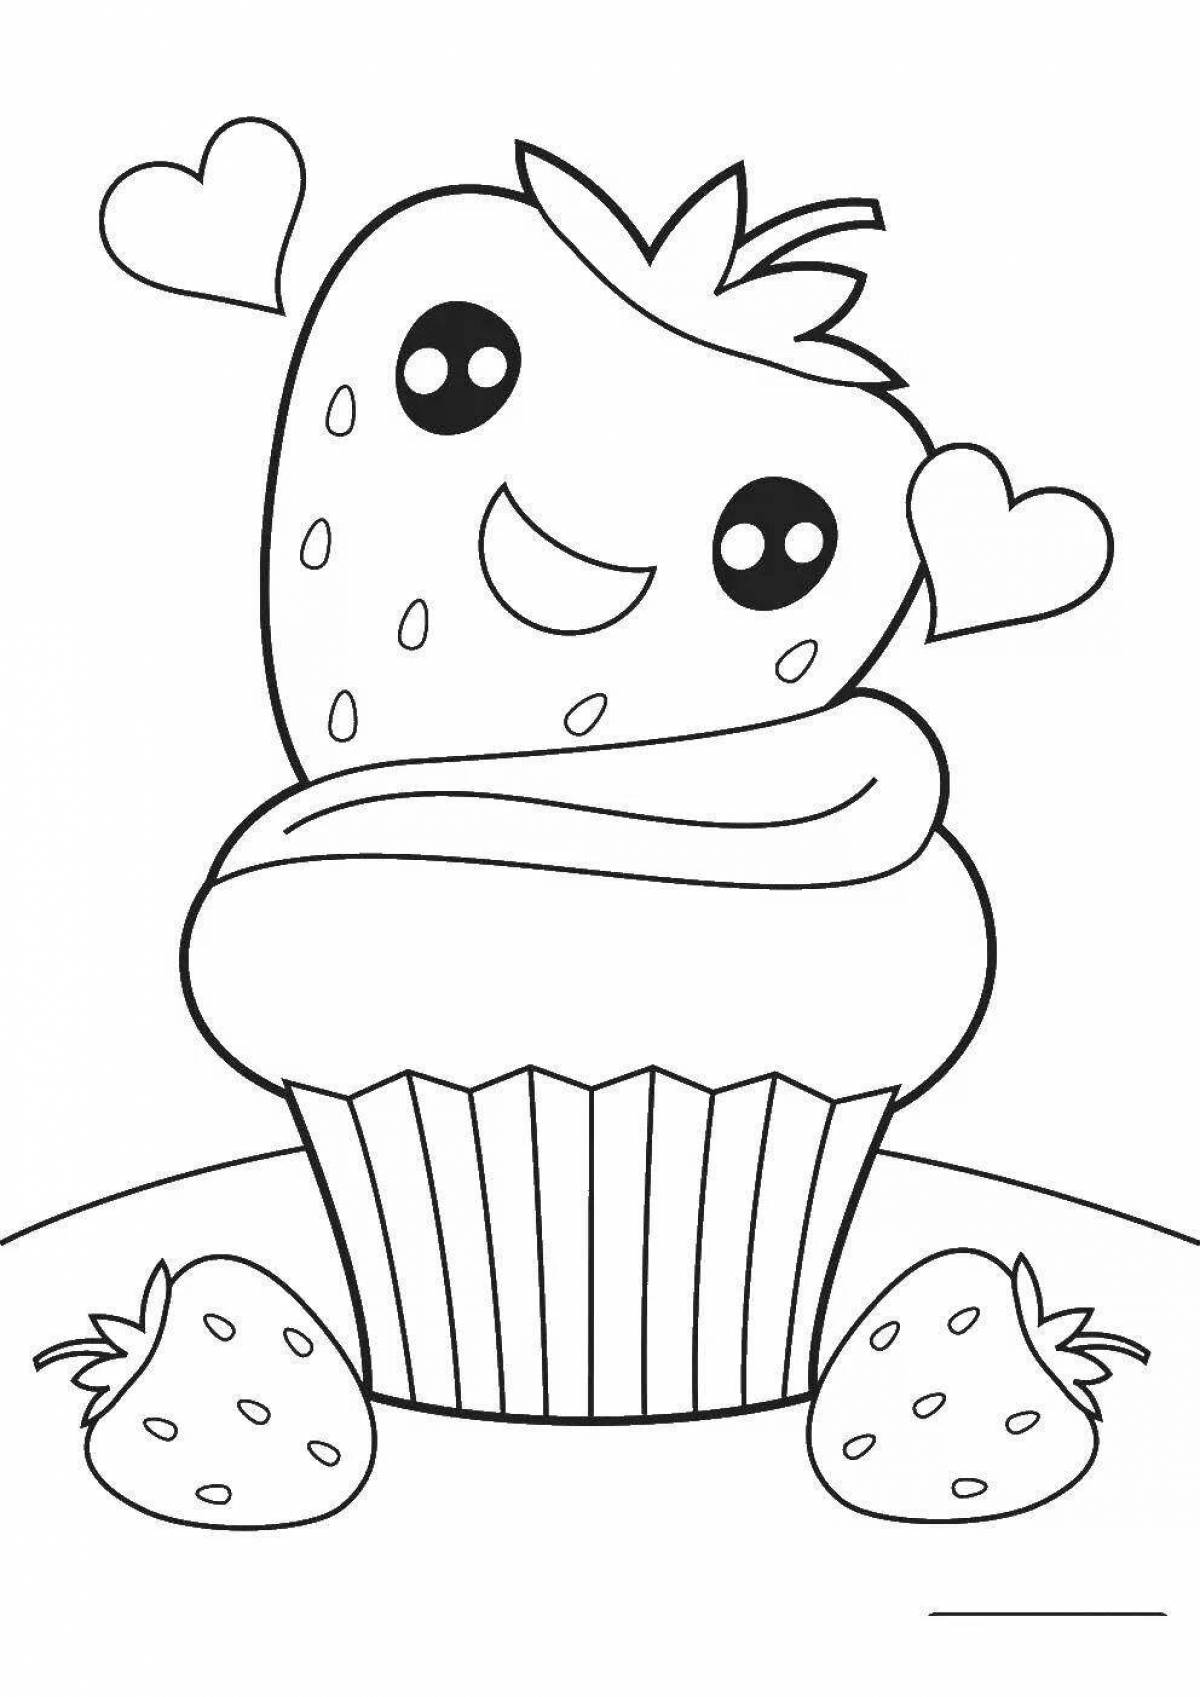 Squishy food coloring page invitation